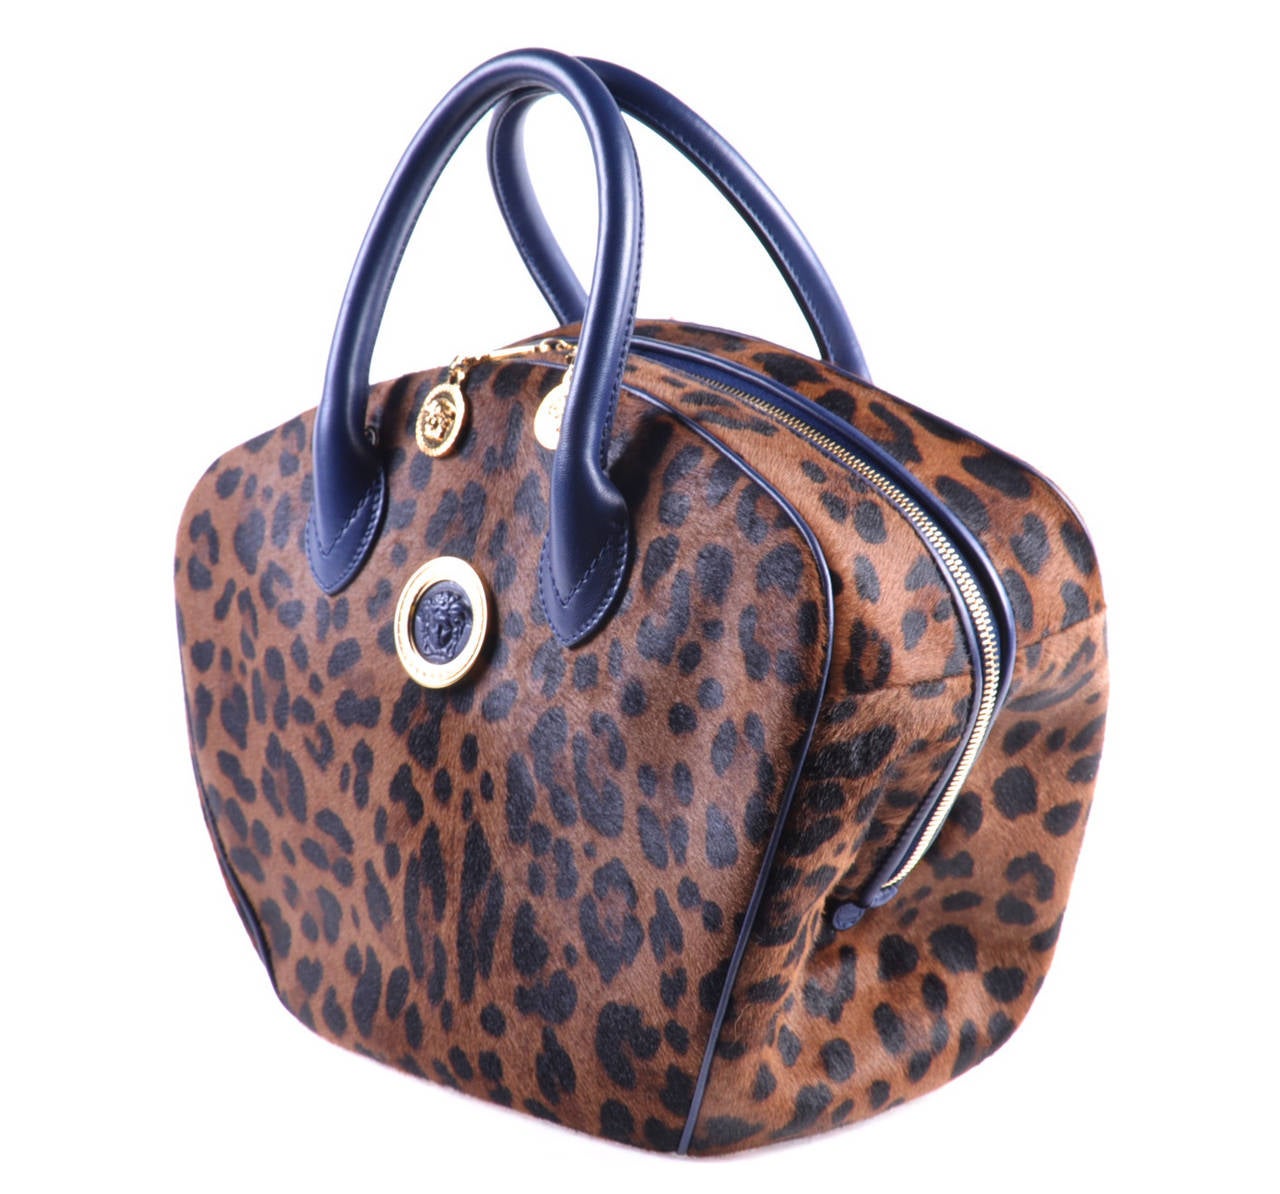 VERSACE

 Versace handbag

Calf hair

Animal print

Blue leather trim

Black silk lining.

Two inner pockets.

Made in Italy.

 MEASUREMENTS Height: 11 Length: 15in  Depth: 7in